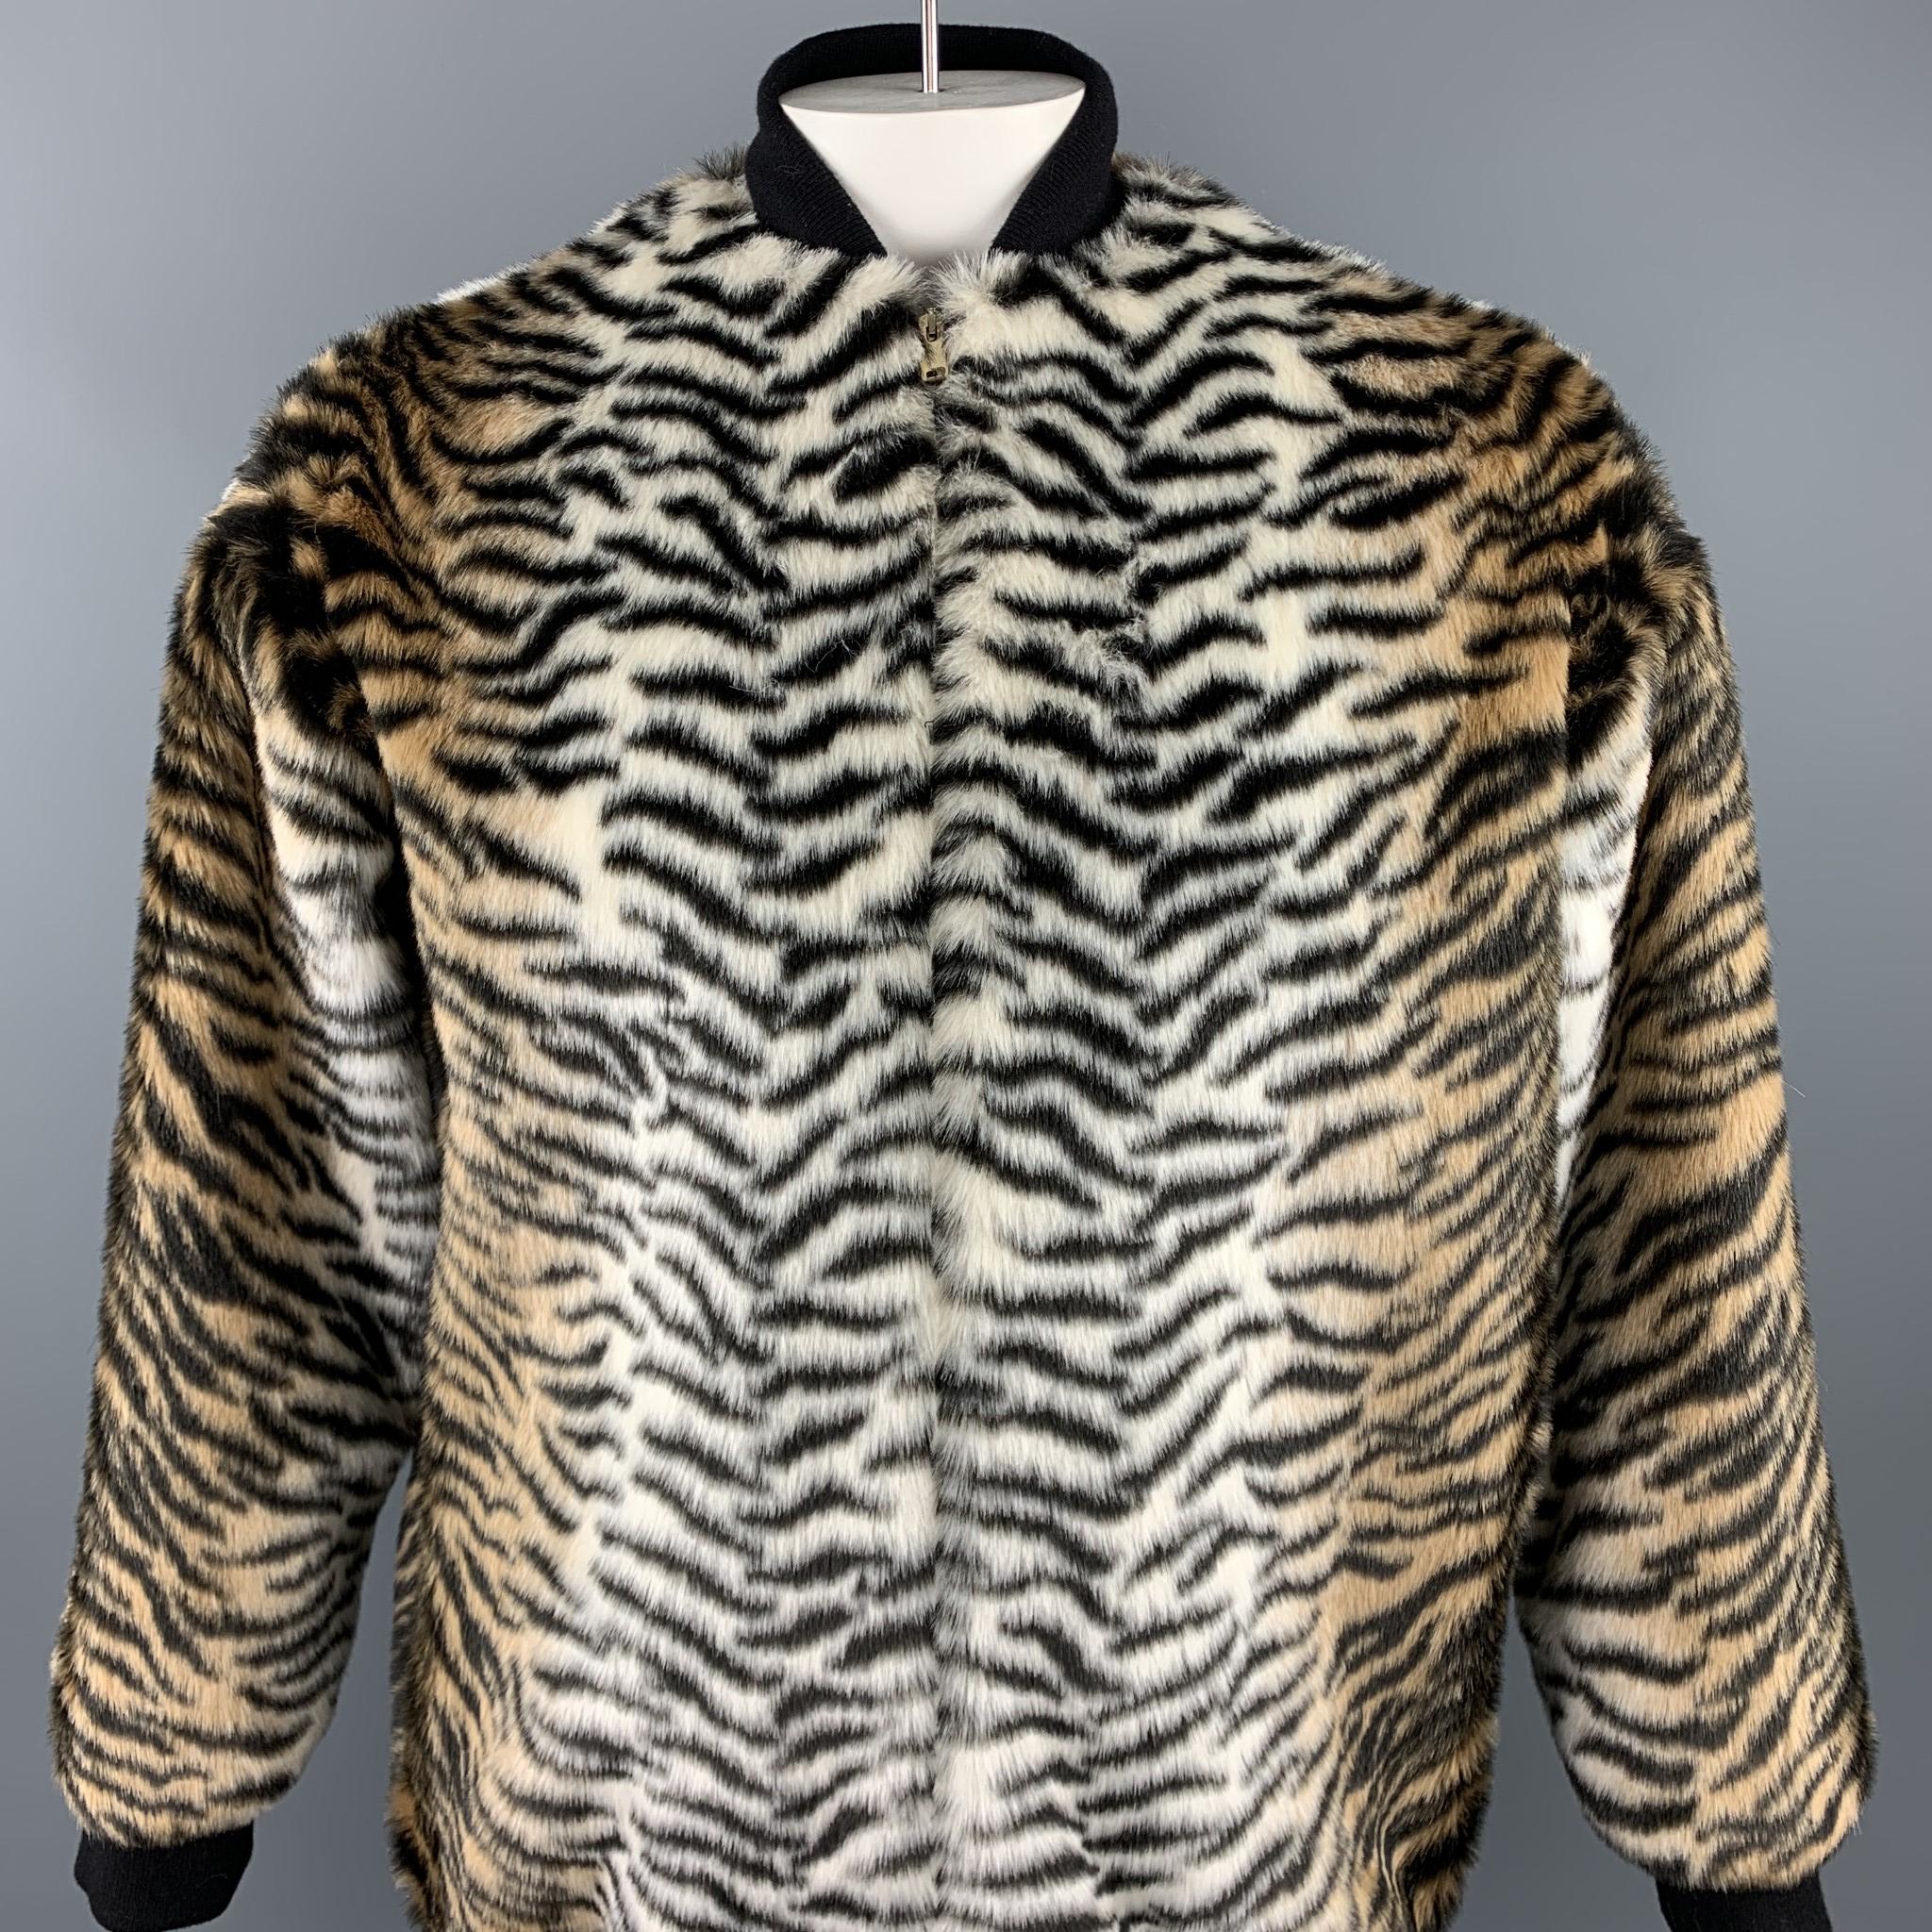 STELLA McCARTNEY jacket comes in a black & tan tiger print faux fur featuring a oversized bomber style and a zip up closure.

Excellent Pre-Owned Condition.
Marked: 38

Measurements:

Shoulder: 24 in. 
Bust: 48 in. 
Sleeve: 23 in. 
Length: 30 in. 